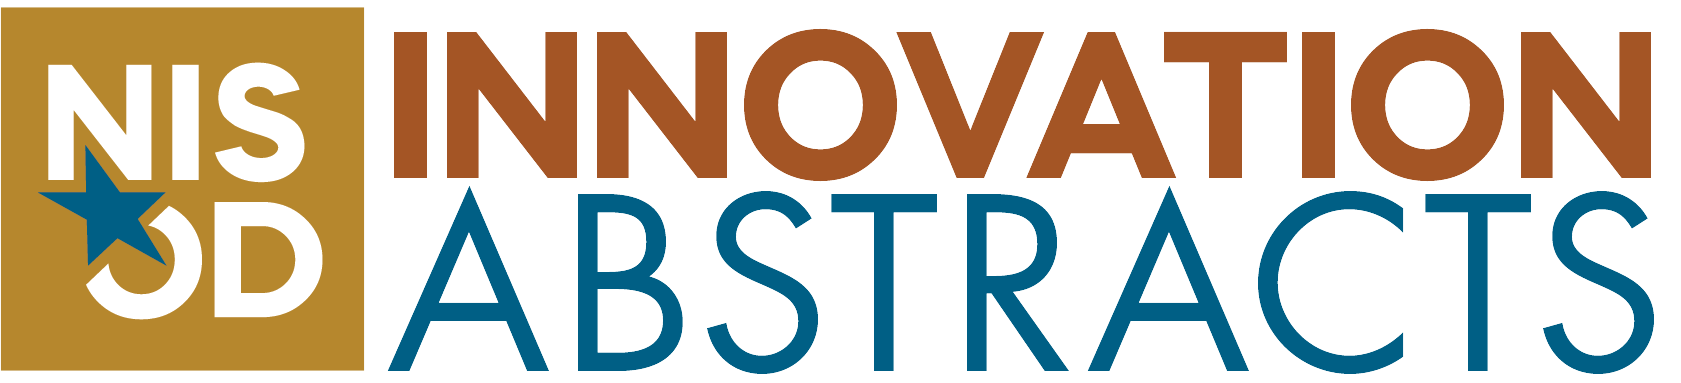 Innovation Abstract Banner